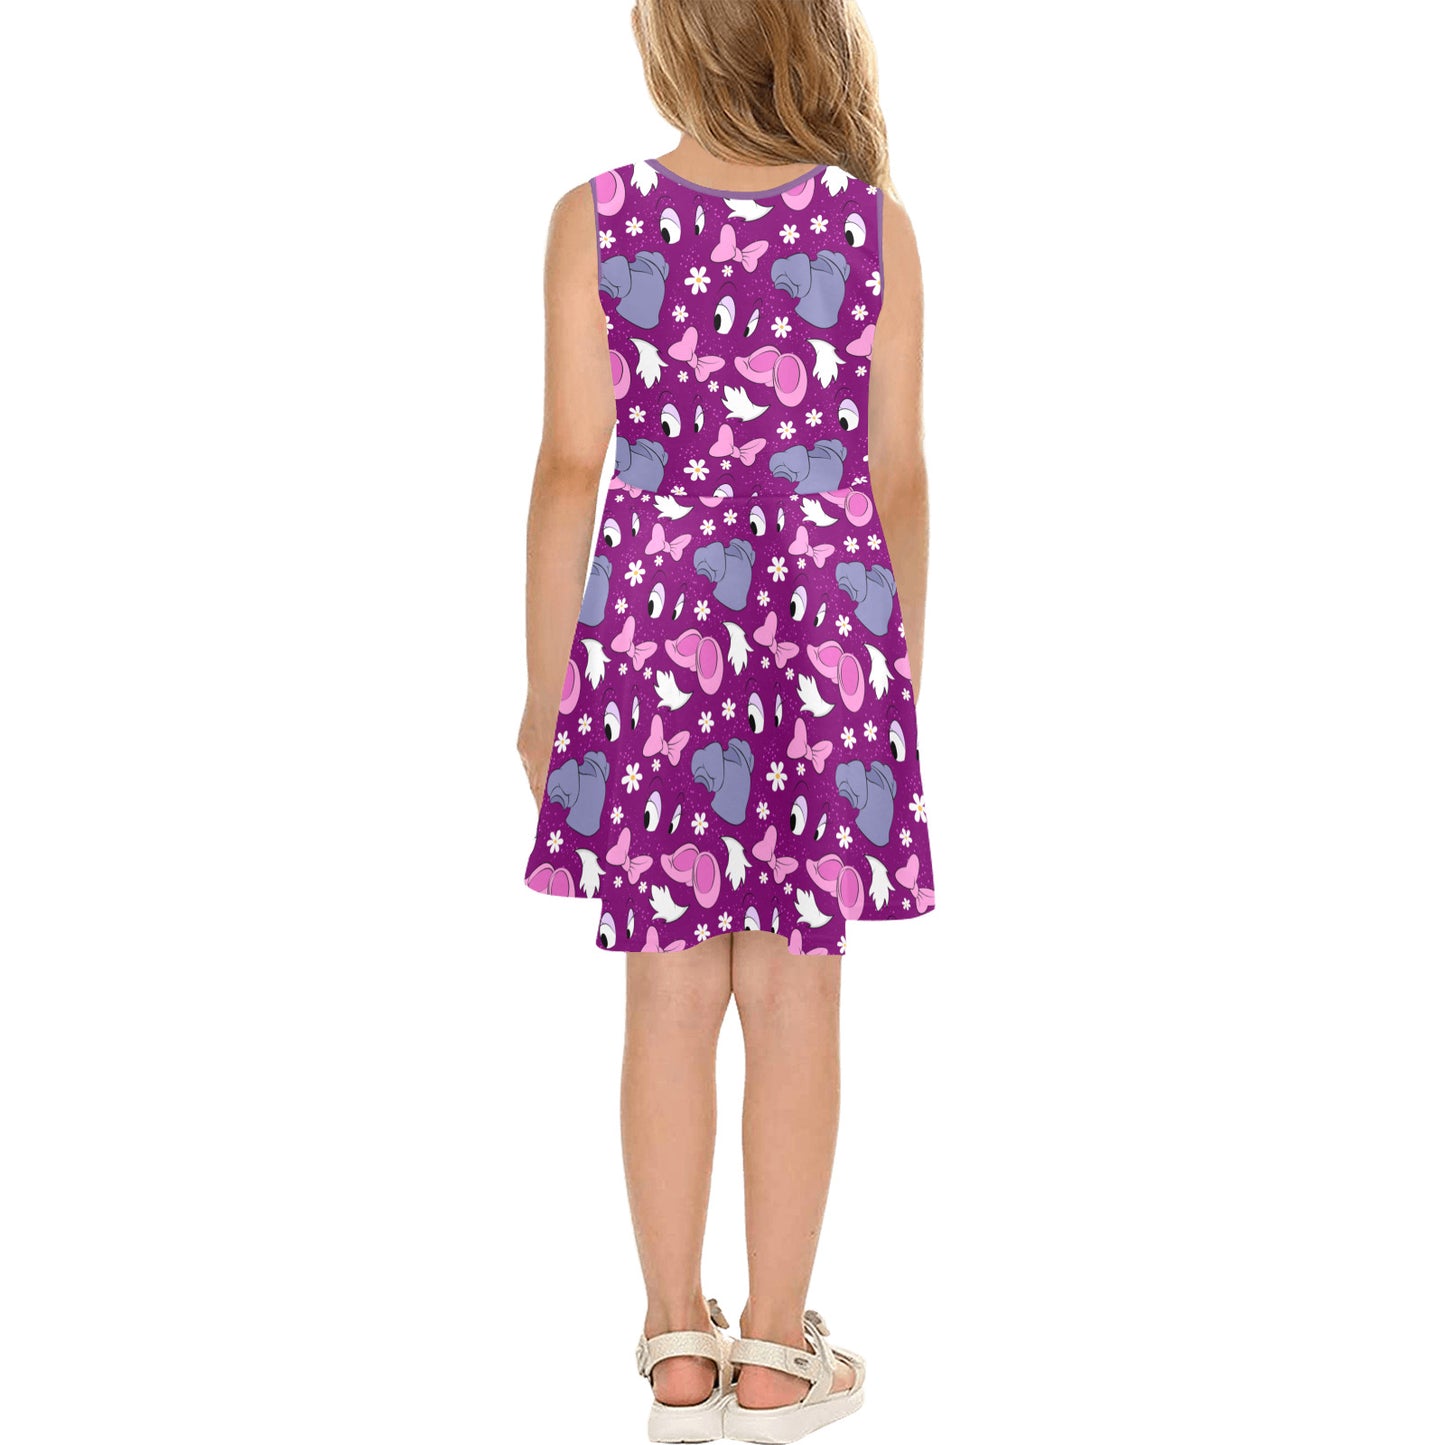 Born To Stand Out Girls' Sleeveless Sundress